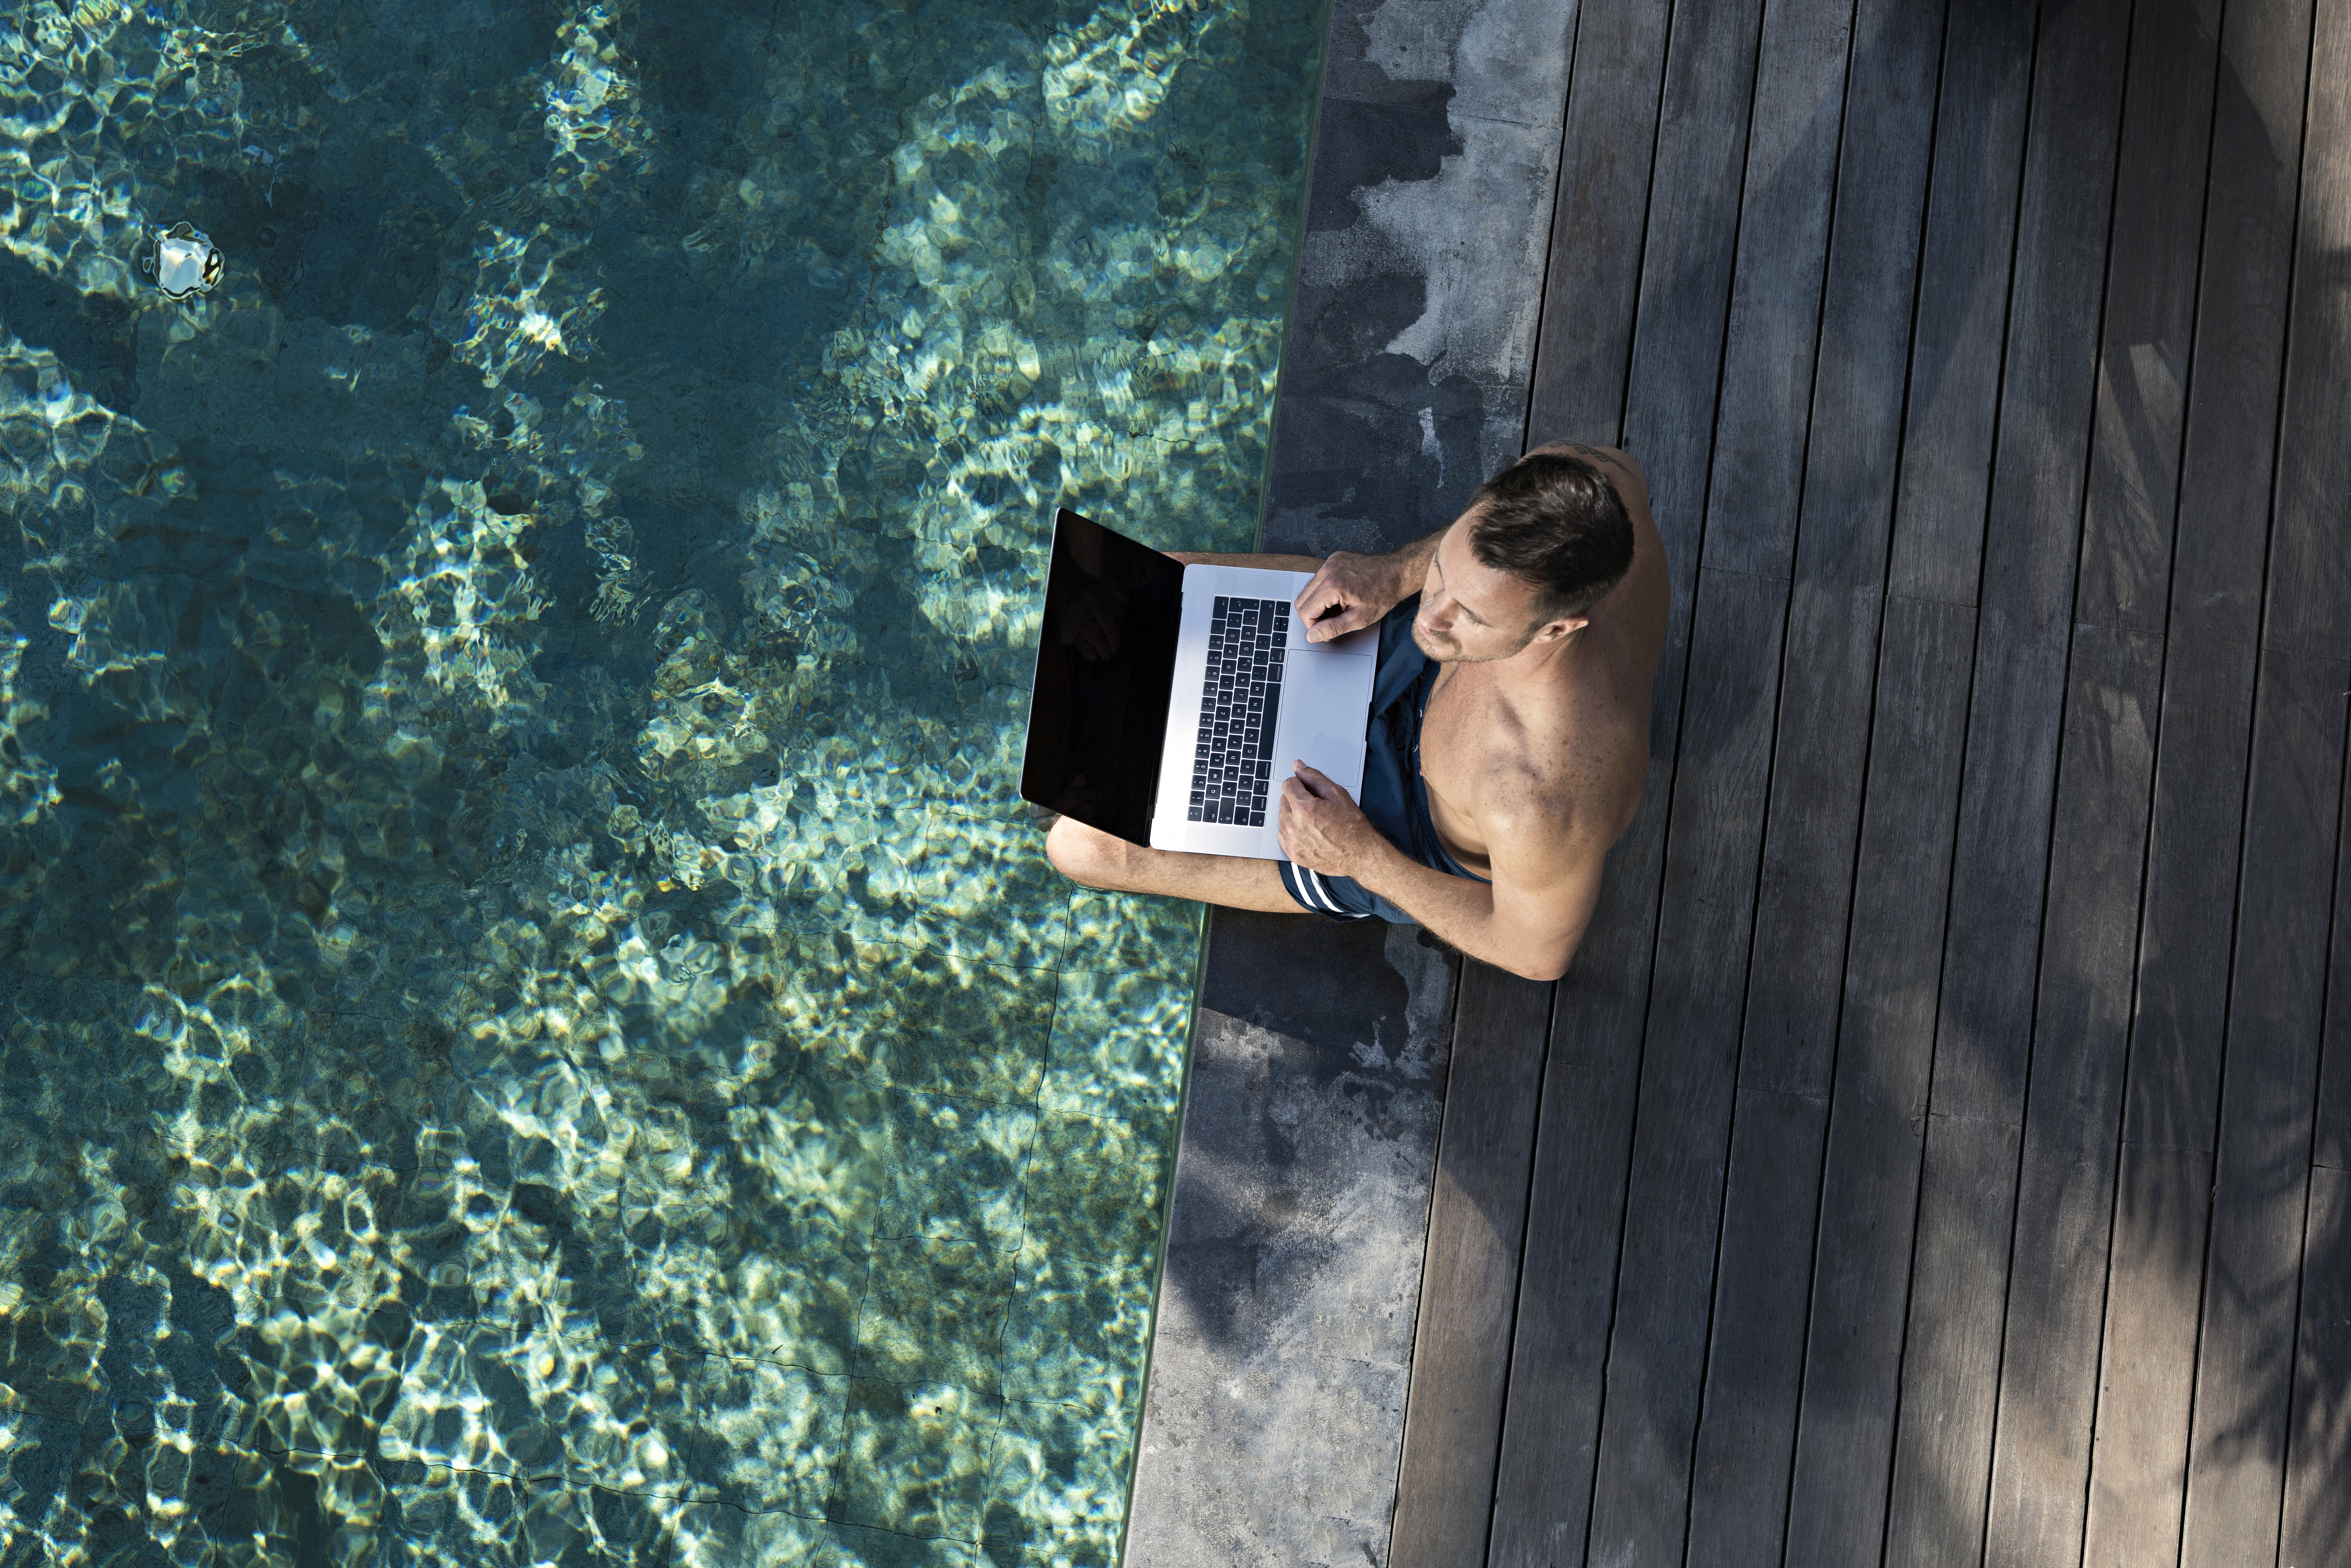 Mature man sitting at the poolside, using laptop | Source: Getty Images